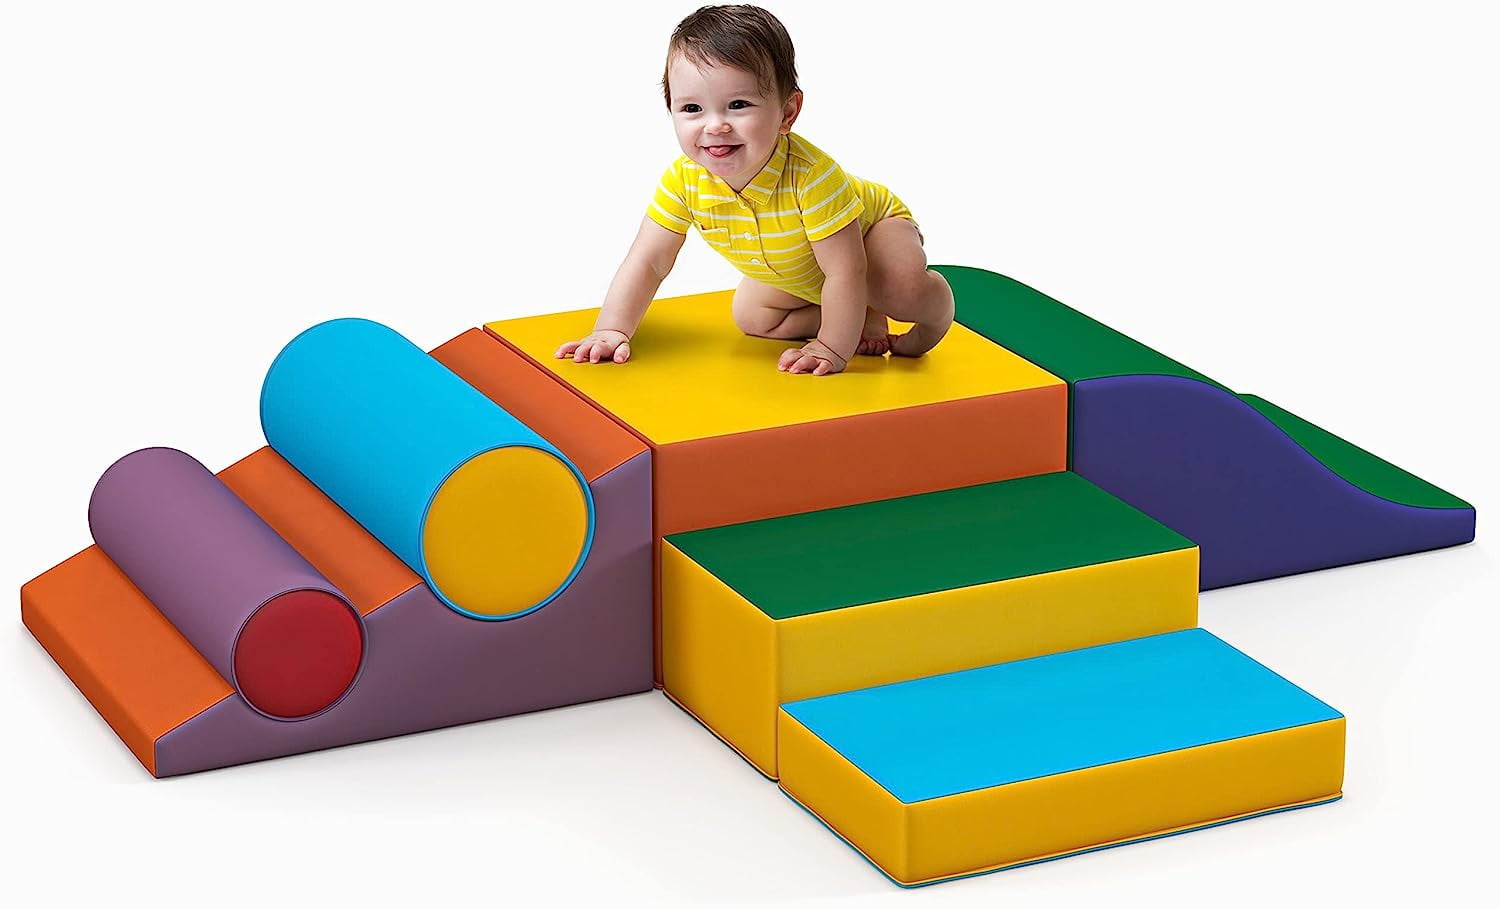  Climb and Crawl Activity Play Set - Climbing Foam Shape Toy for  Toddlers 5 Piece Soft Zone Climbing Blocks, Safe Indoor Crawling Gym  Equipment for Toddler, Infant, Baby Waterproof and Easy